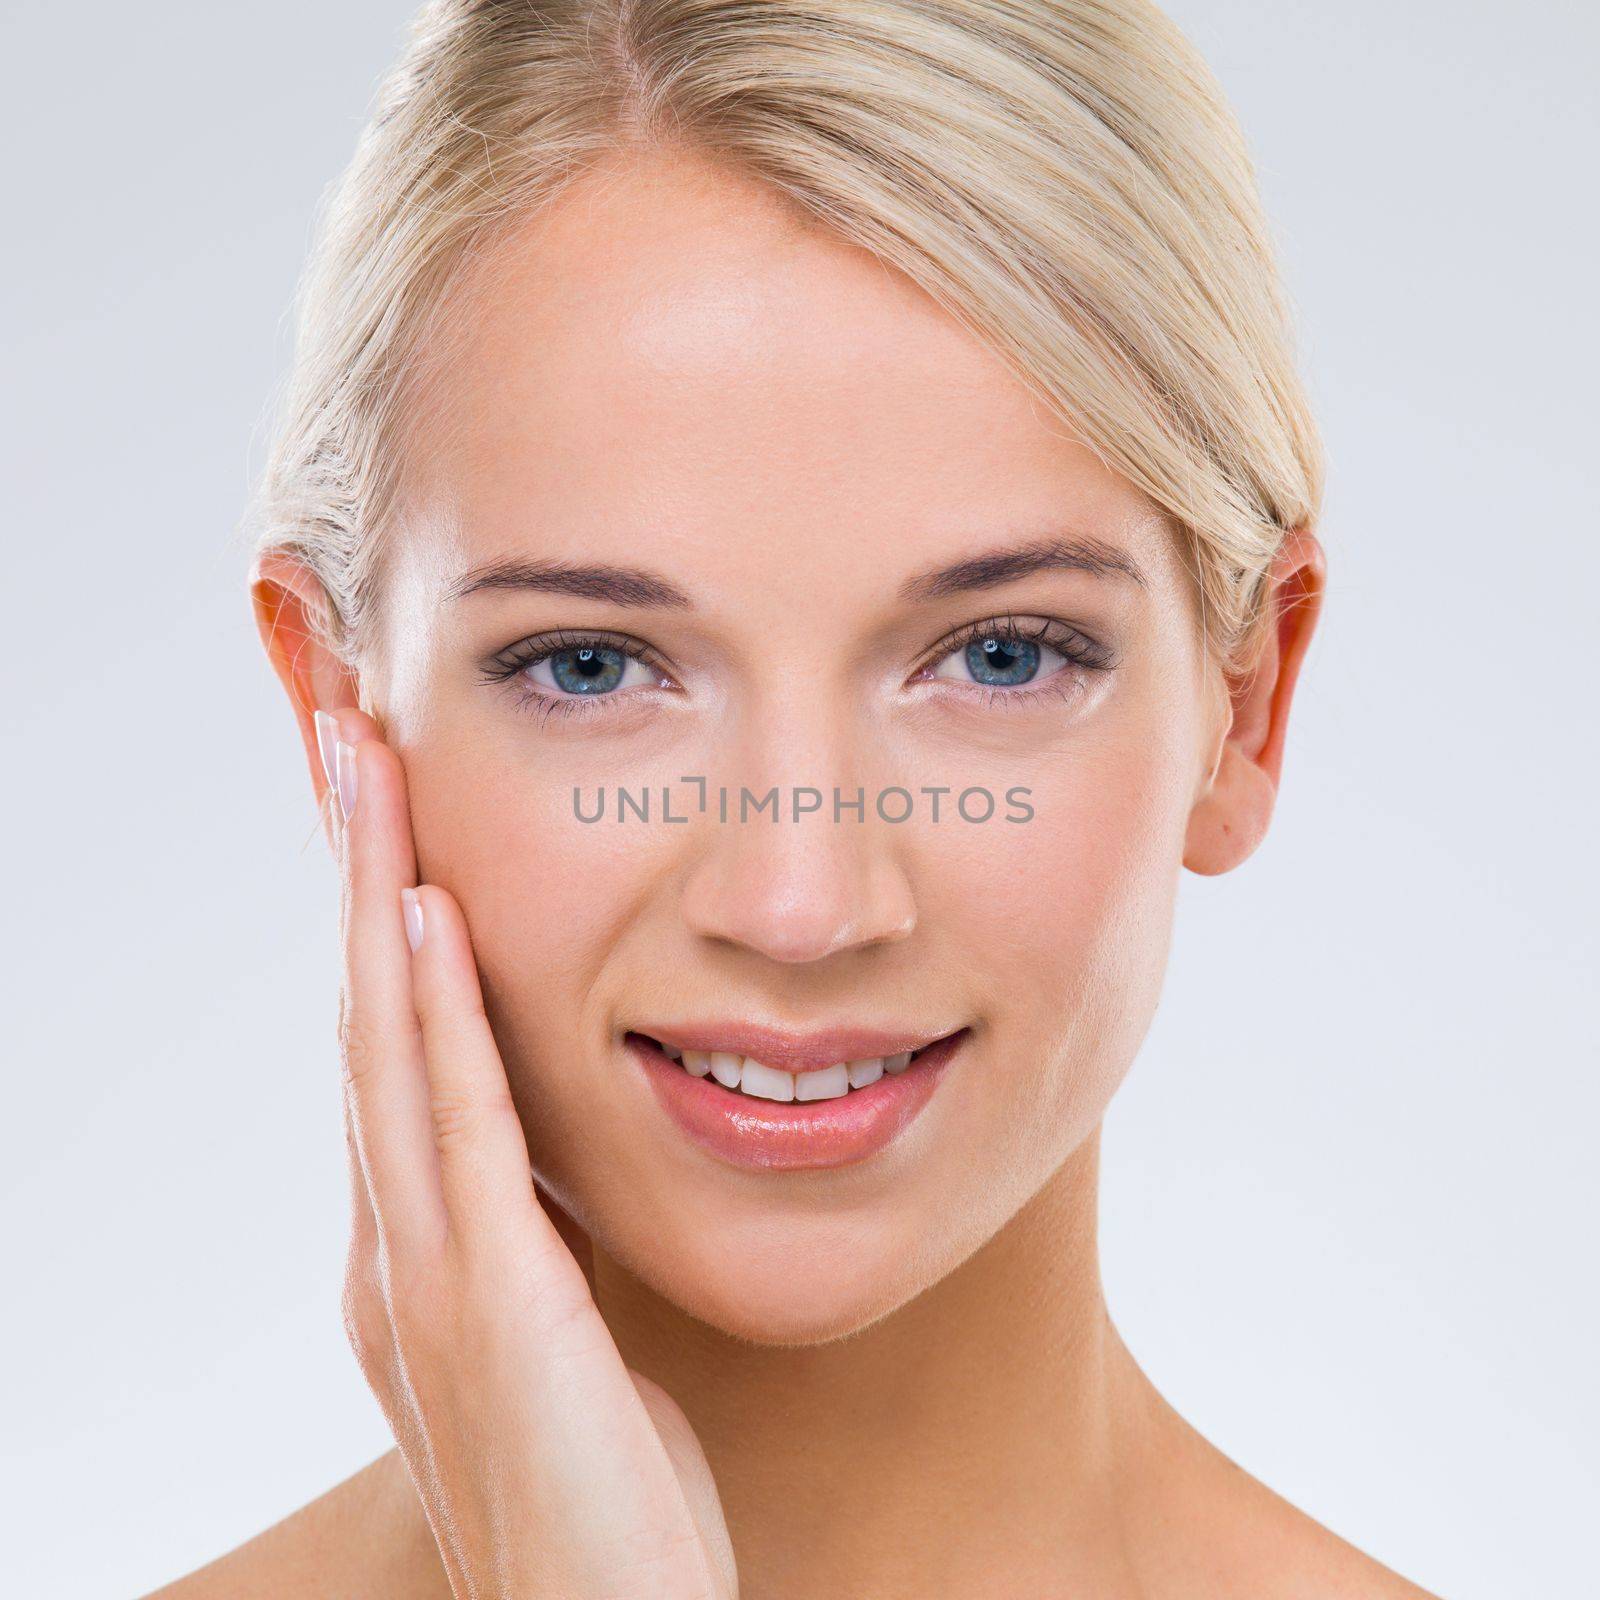 Fresh-faced beauty Got it. Portrait of a beautiful blonde touching her face with her hand